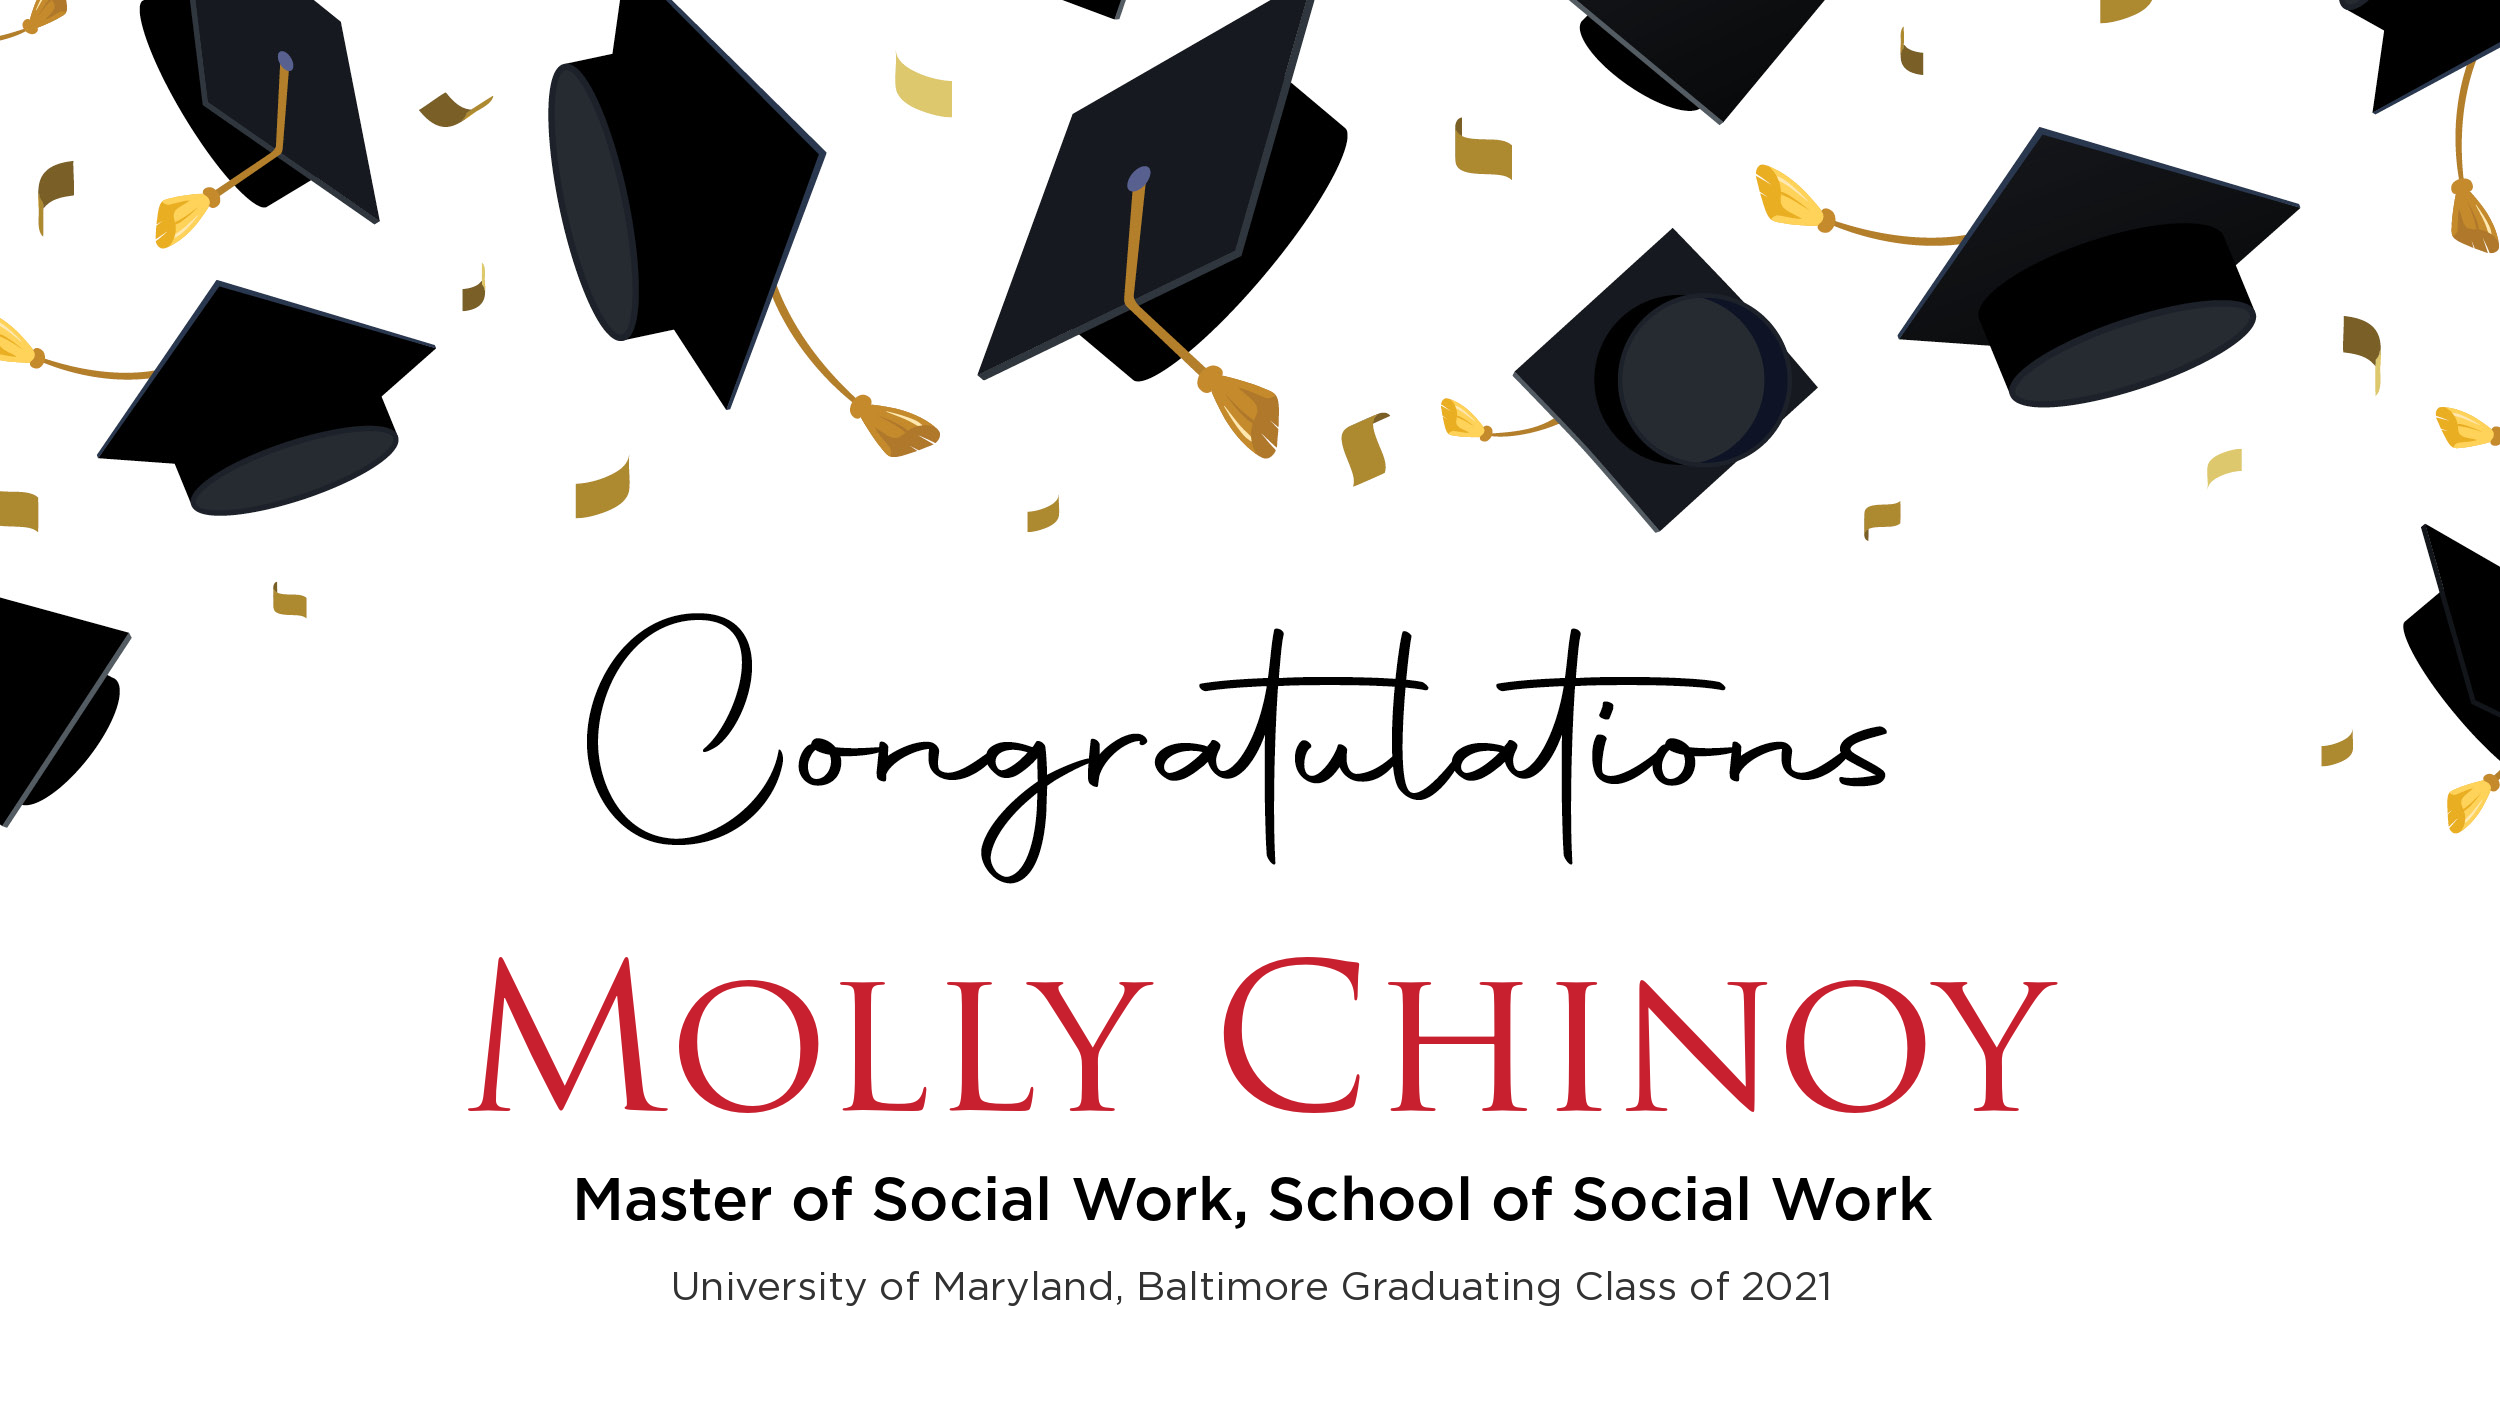 Congratulations Molly Chinoy, Master of Social Work